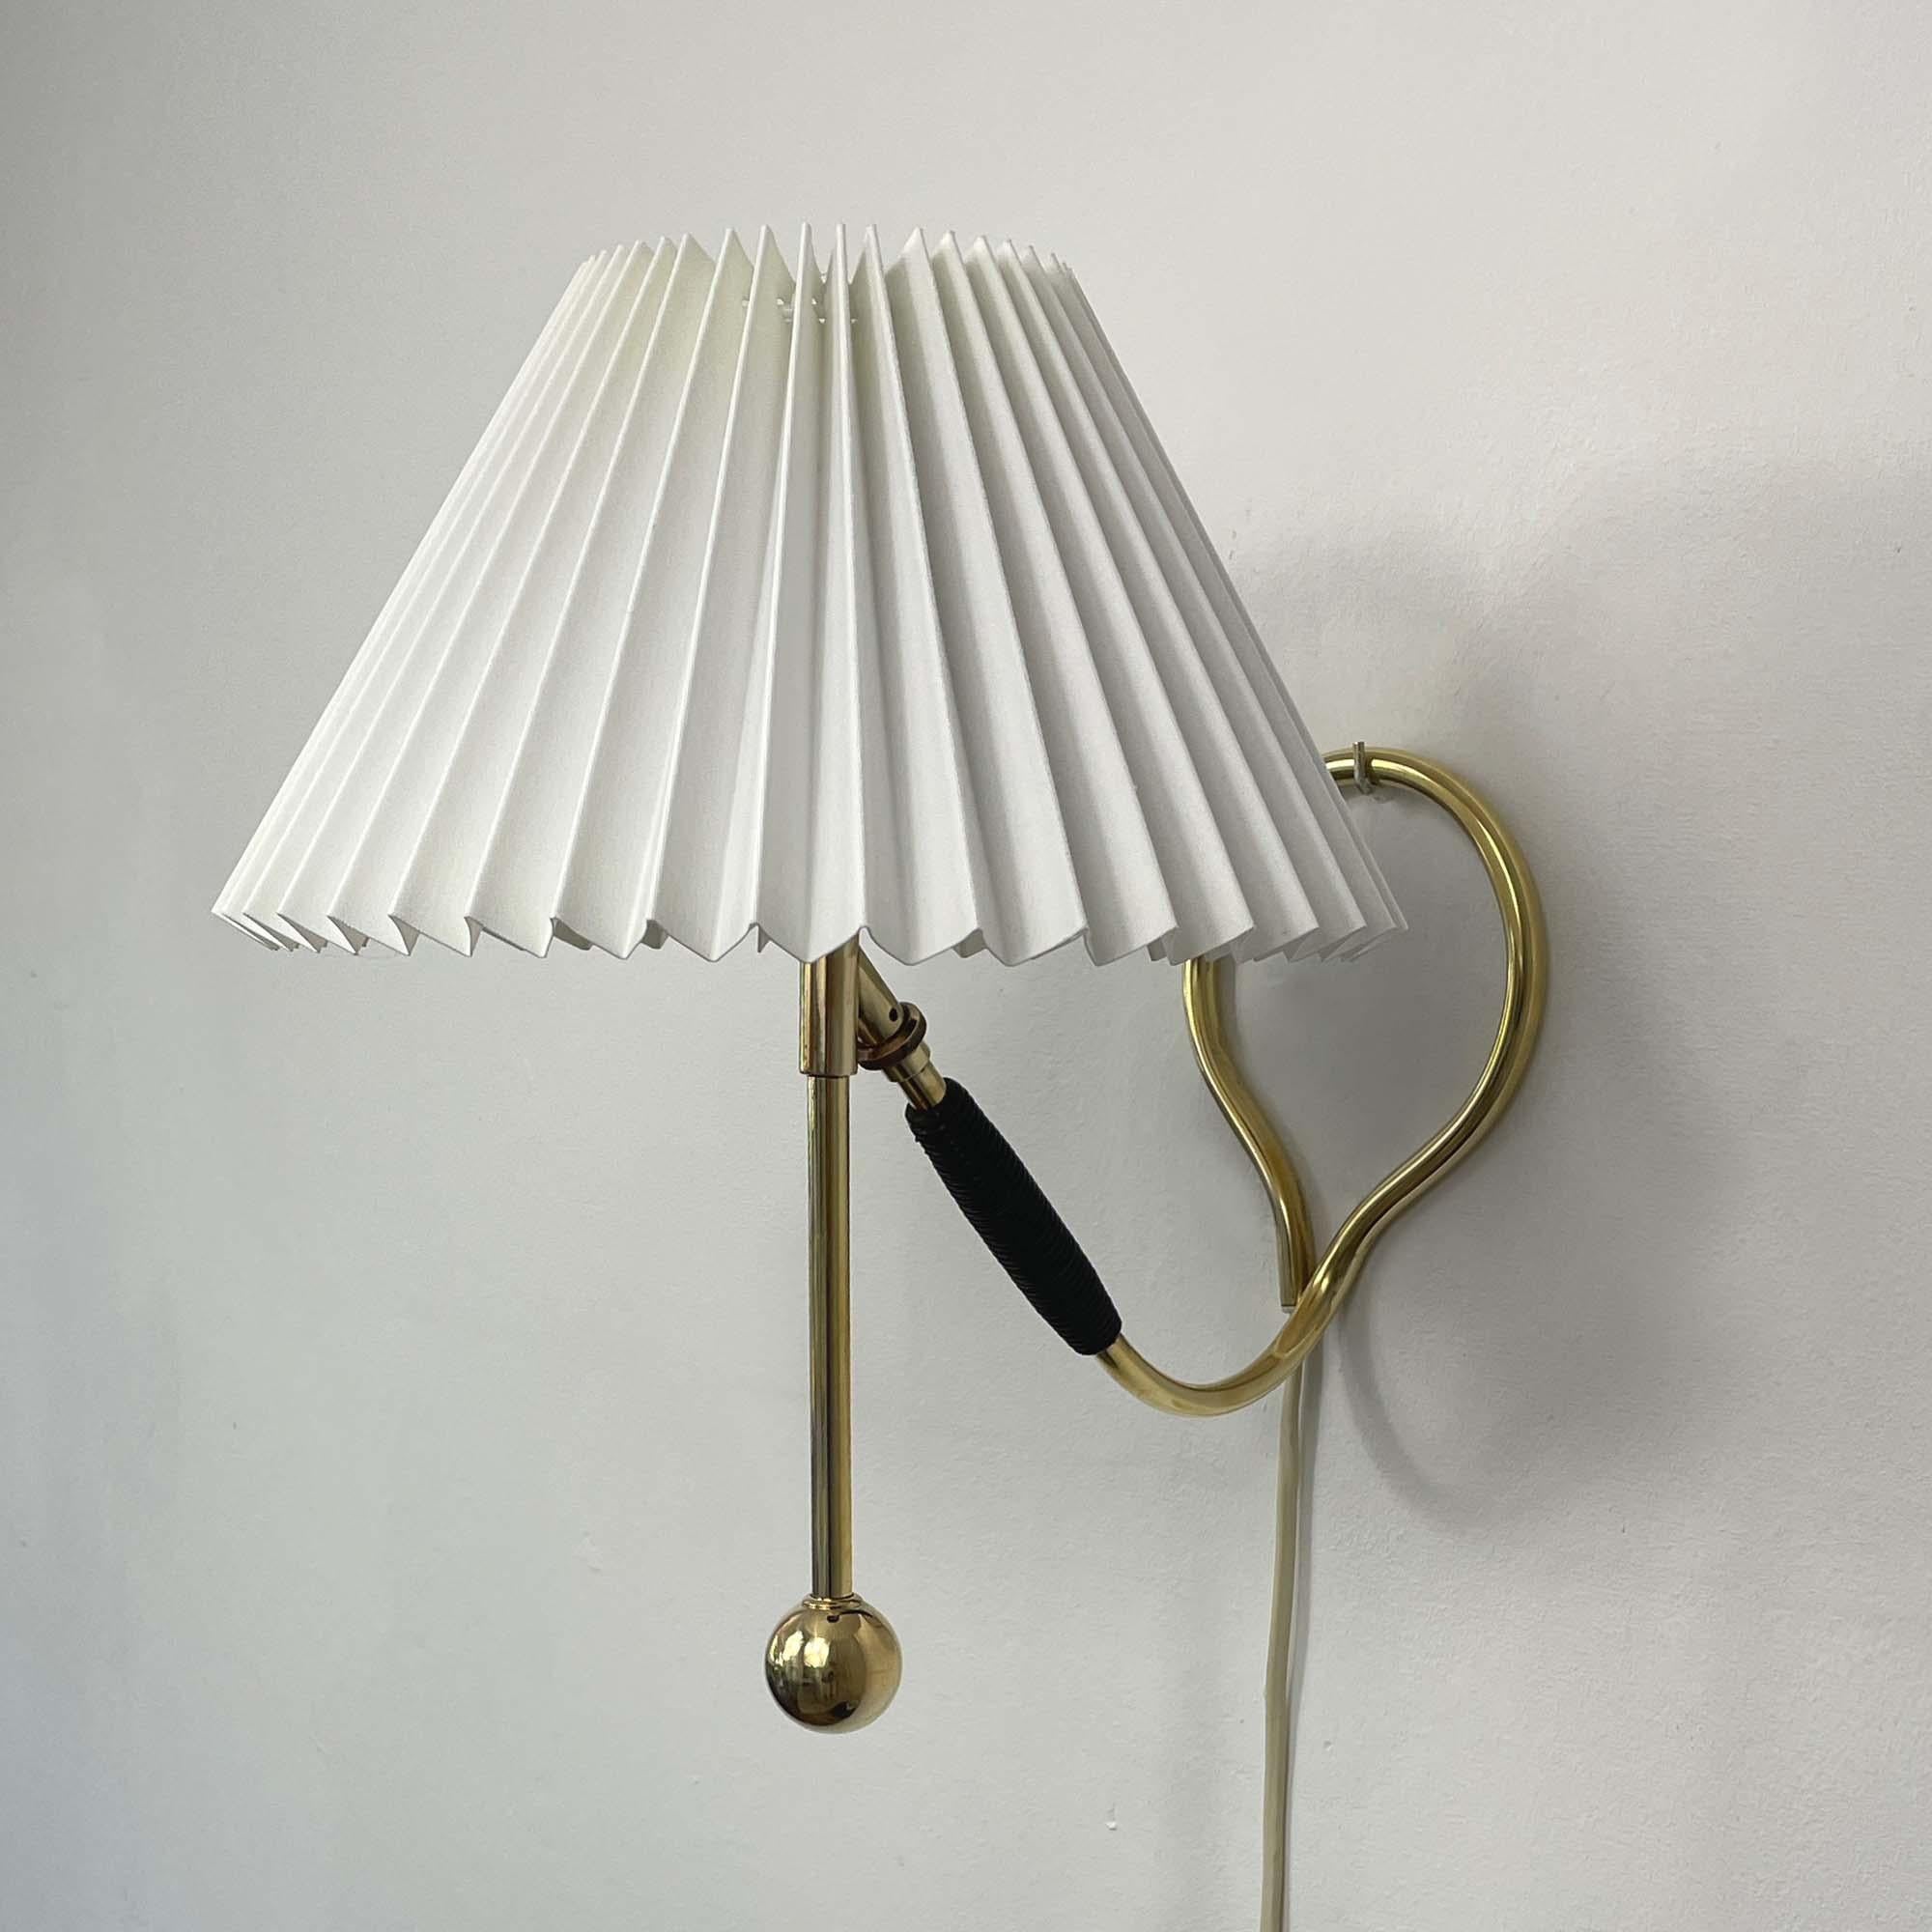 Danish Adjustable Brass and Bakelite Wall and Table Lamp 306 by Kaare Klint, 1950s For Sale